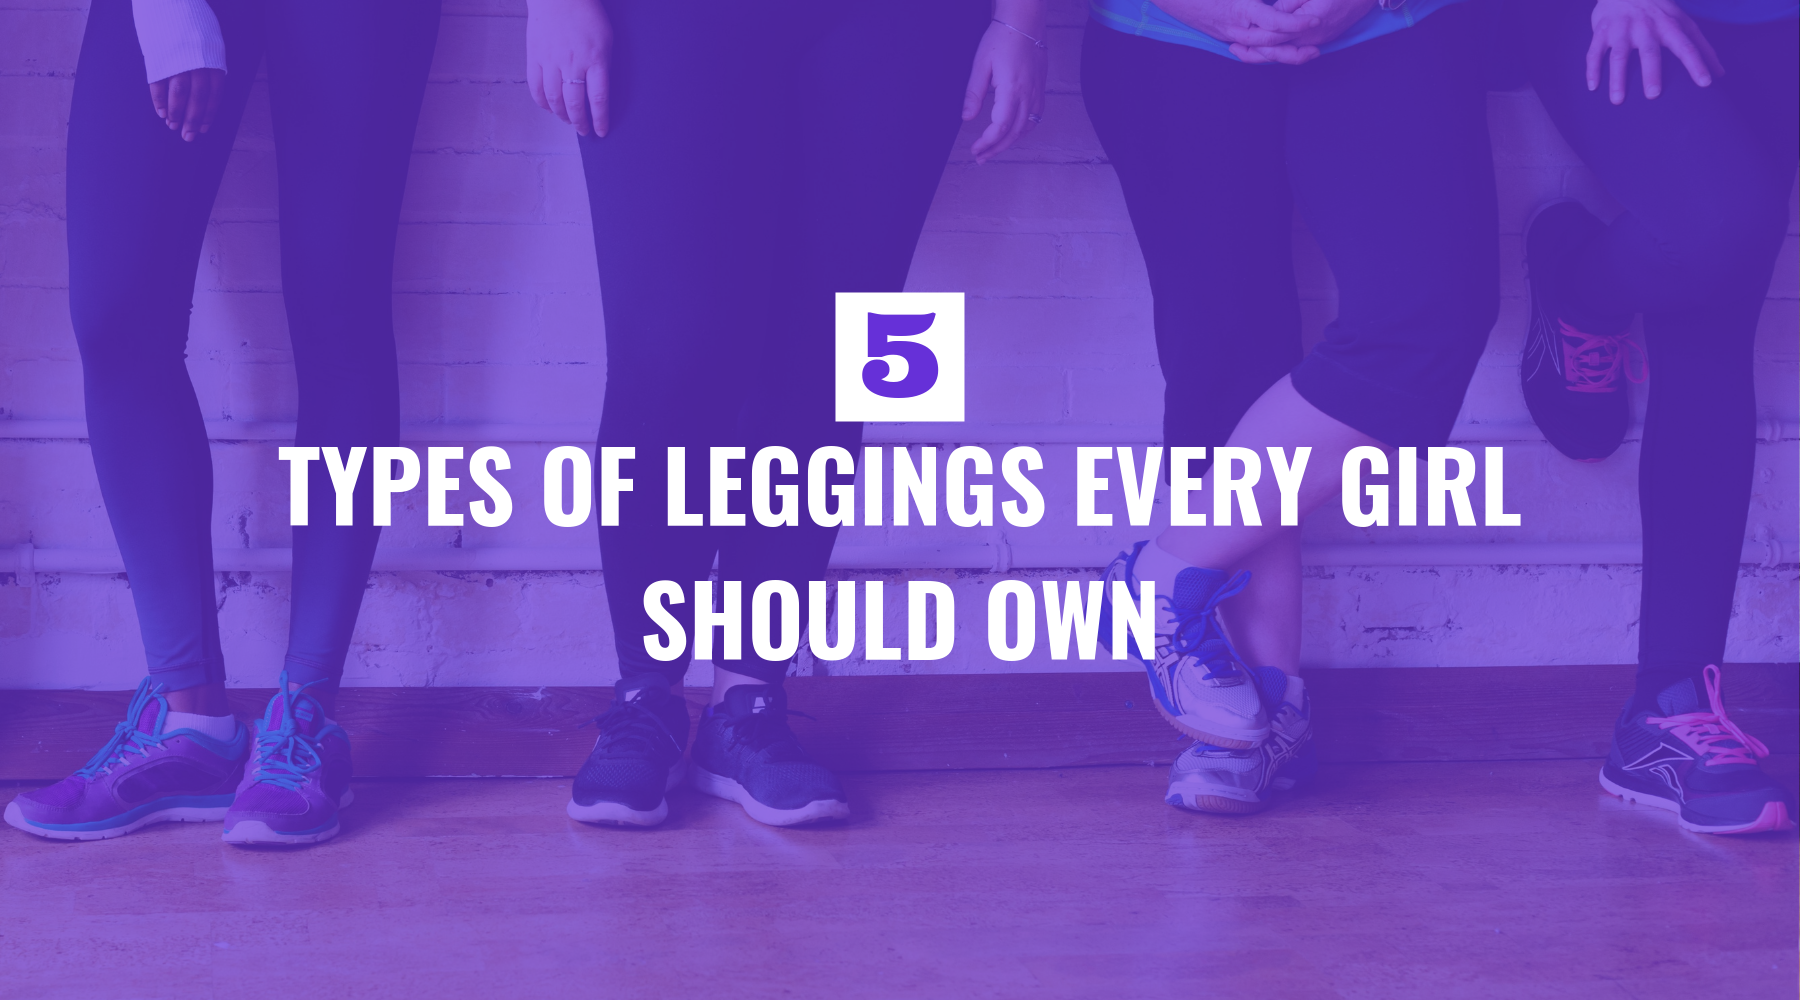 Five Types of Leggings Every Girl Should Own